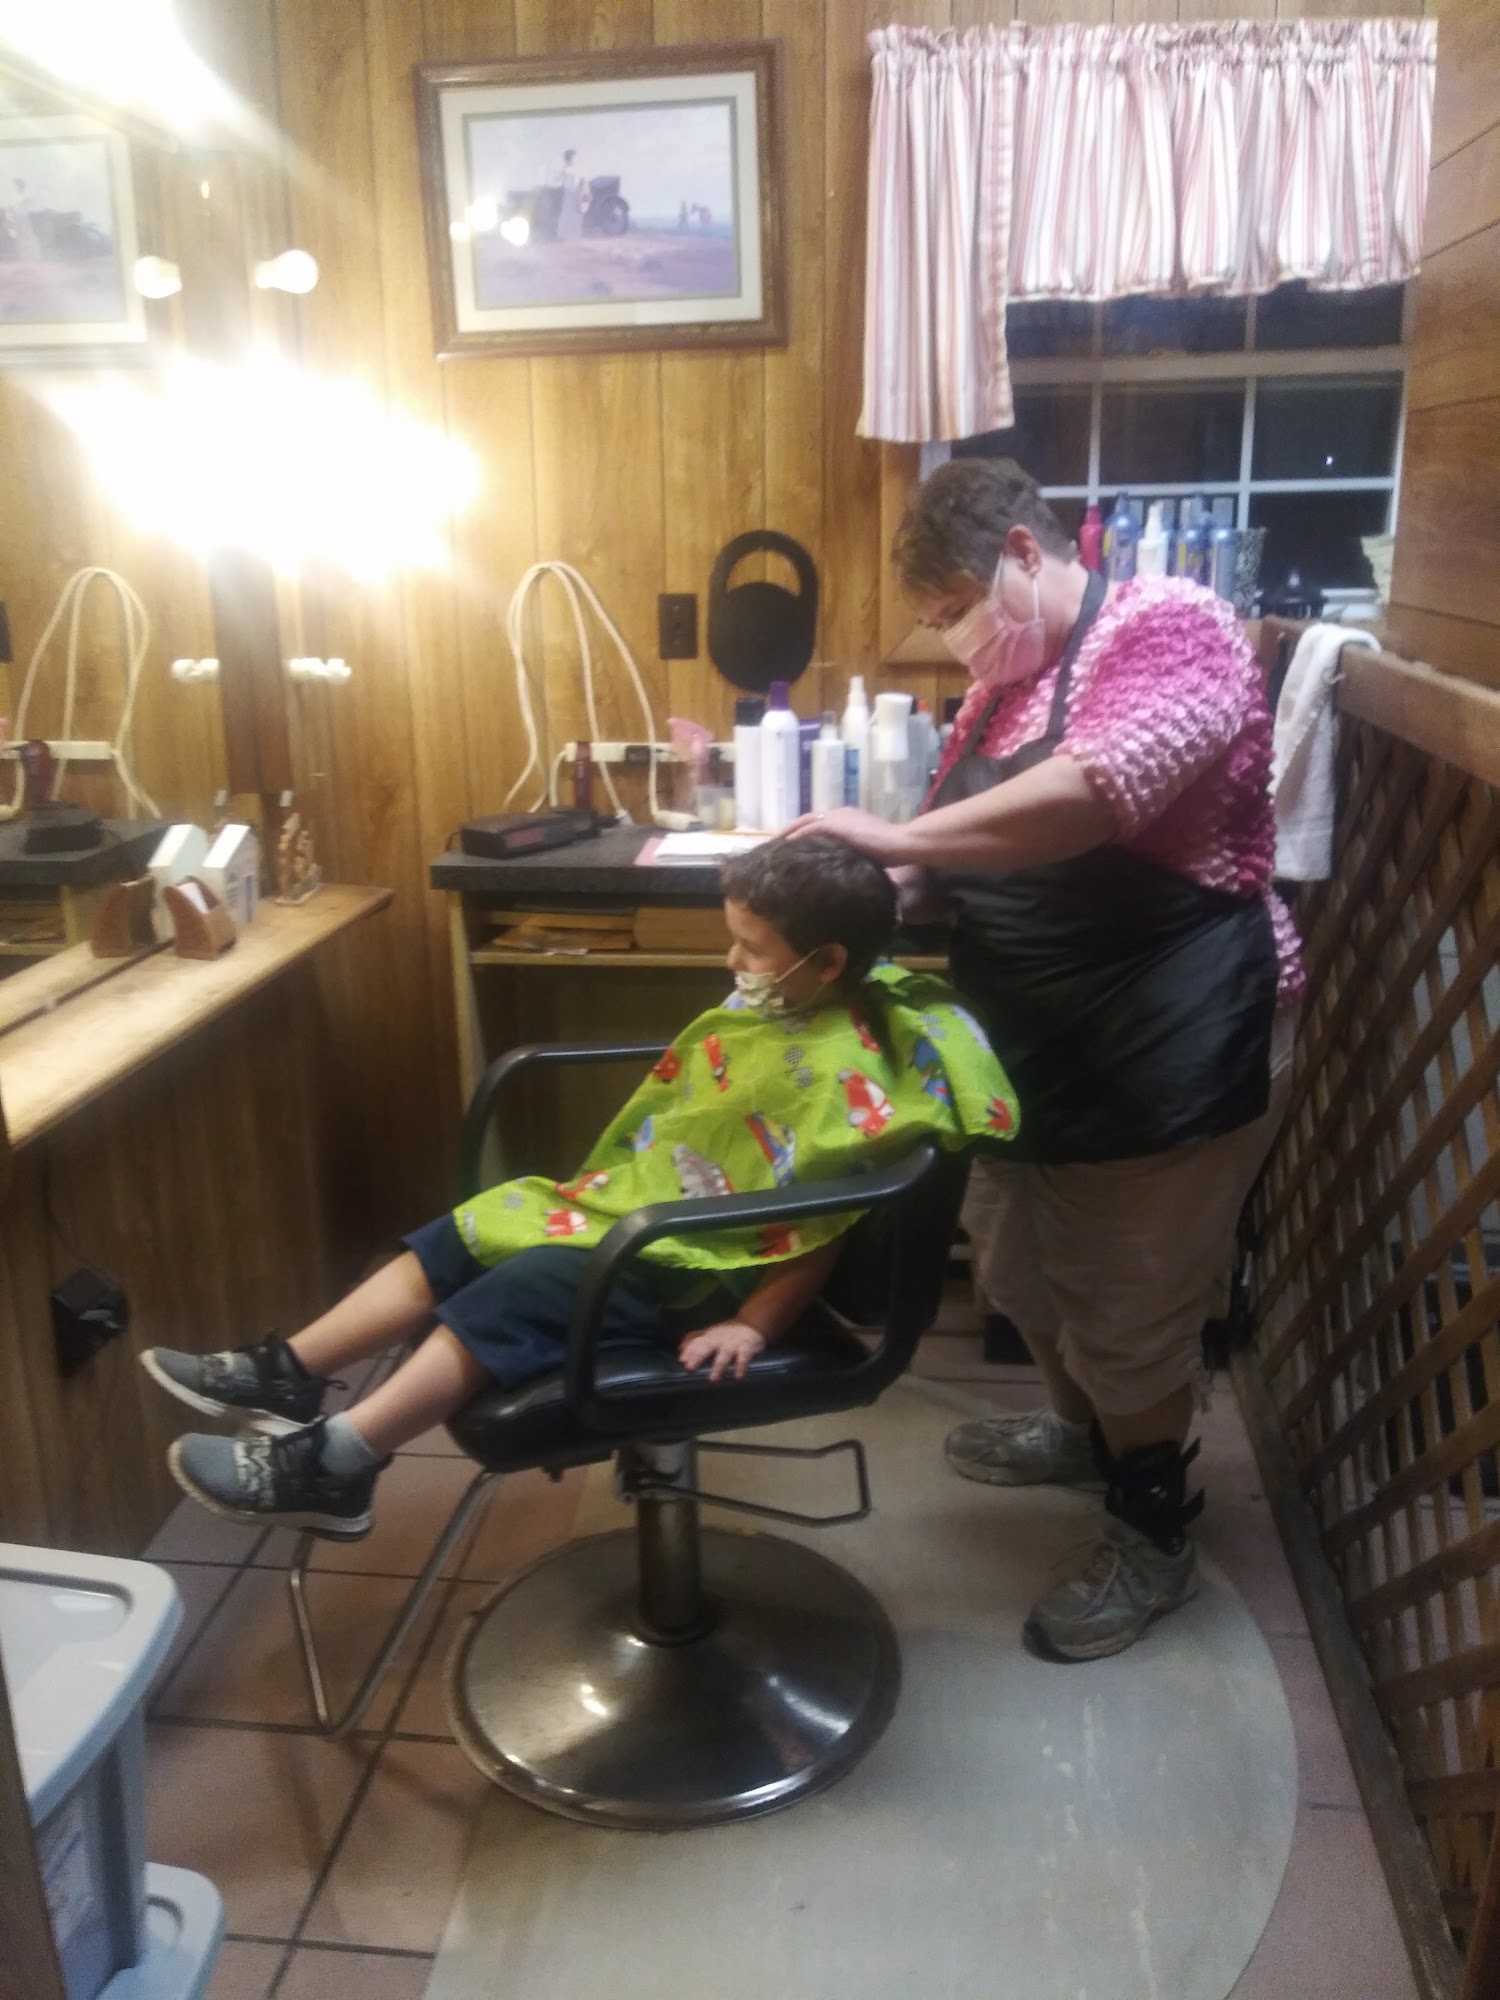 Country Hills Beauty Shop 5230 S York Hwy, Grimsley Tennessee 38565